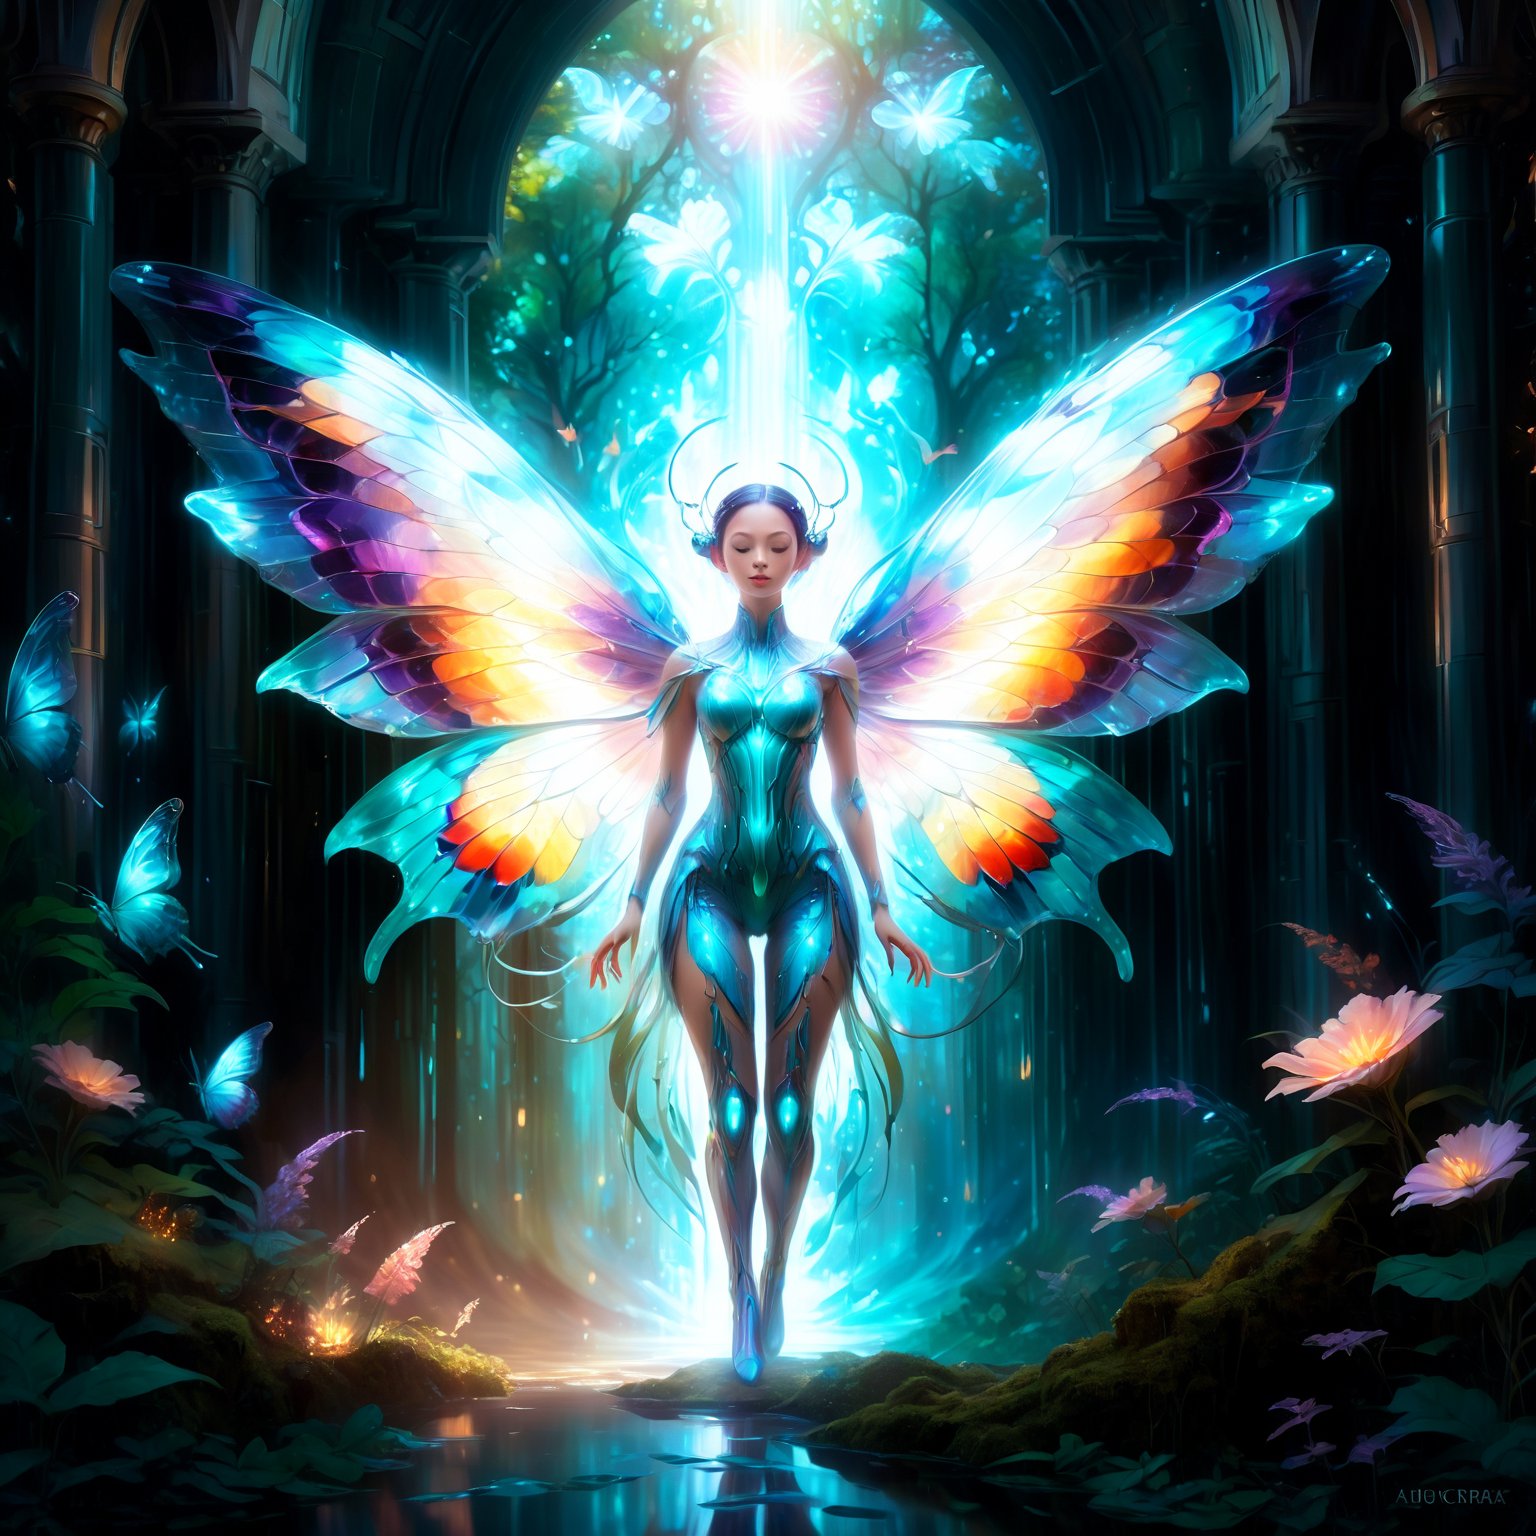 In a surreal digital artwork, a girl with radiant butterfly wings stands in a mystical forest. Her body emits a gentle, pulsating glow, casting an ethereal light that reveals hidden forest details. The wings, a masterpiece of nature's art, display a kaleidoscope of shimmering colors, from deep sea blues to fiery sunset oranges. She seems to dance on the air, her movements graceful and fluid, surrounded by a halo of softly glowing particles. This captivating scene, with its rich palette and dreamy atmosphere, is a testament to the digital artist's skill, blending fantasy and realism in a breathtaking visual narrative.